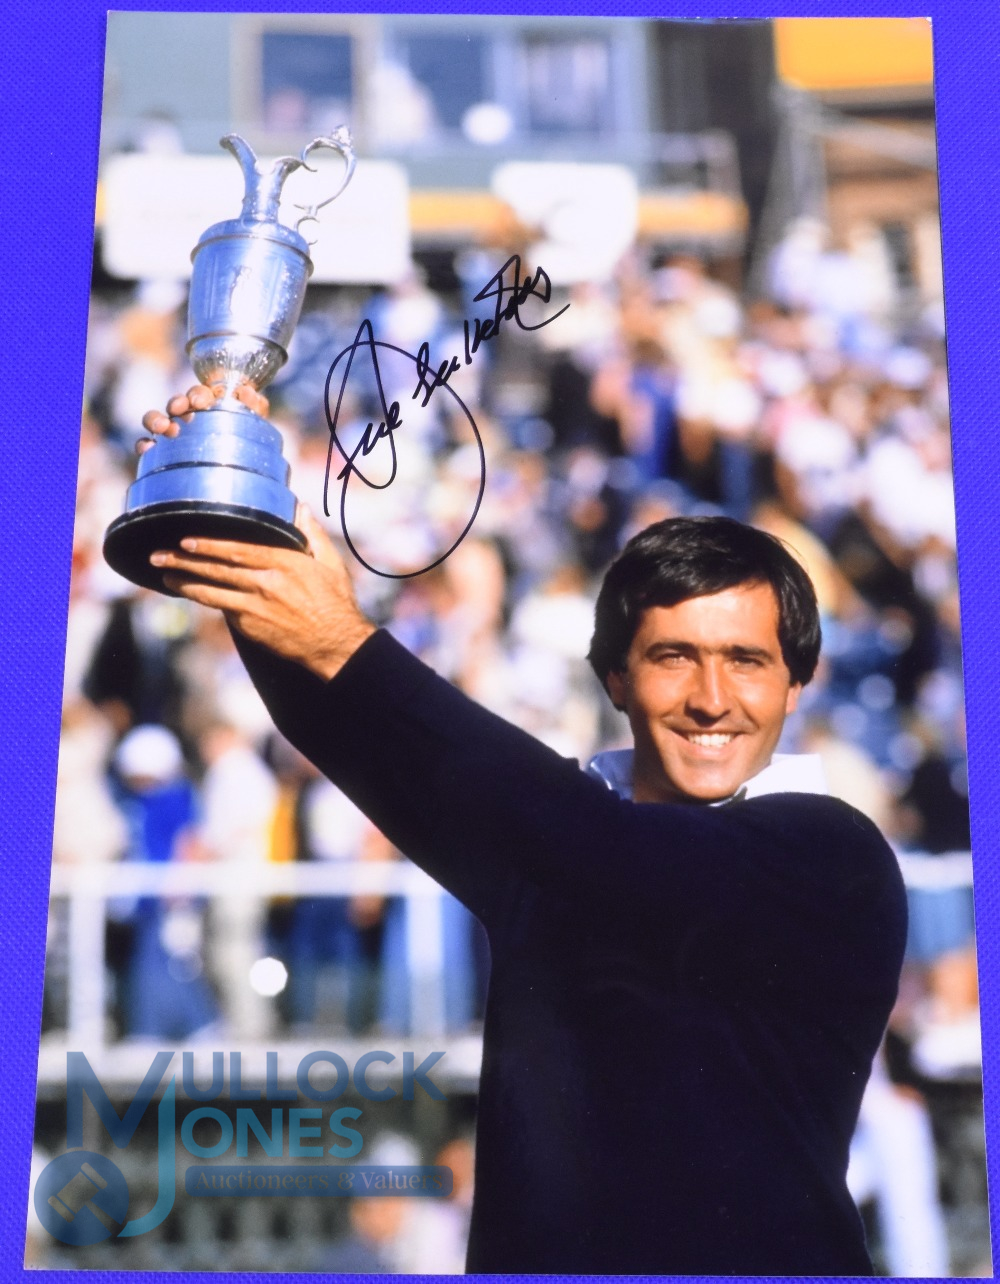 1984 Severiano Ballesteros Open Golf Champion Signed Press Photograph - played at St Andrews with